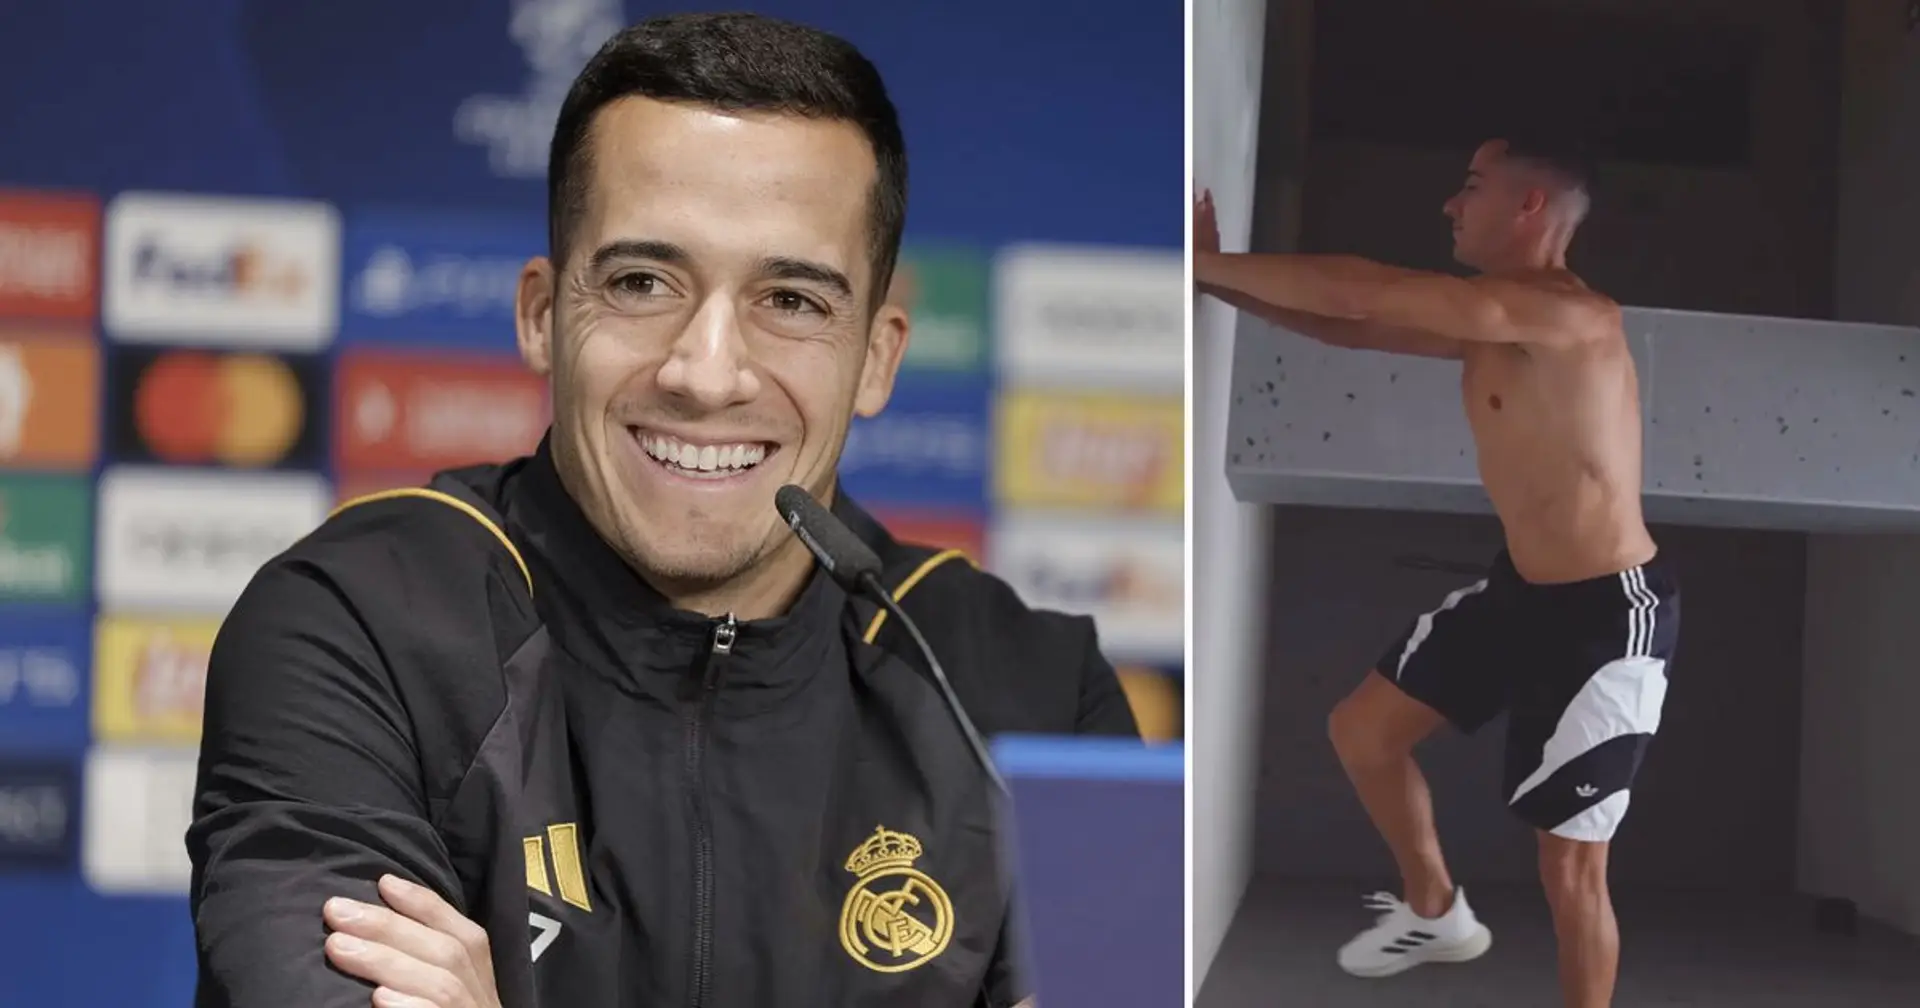 Lucas Vazquez shows great physique in new home workout footage!